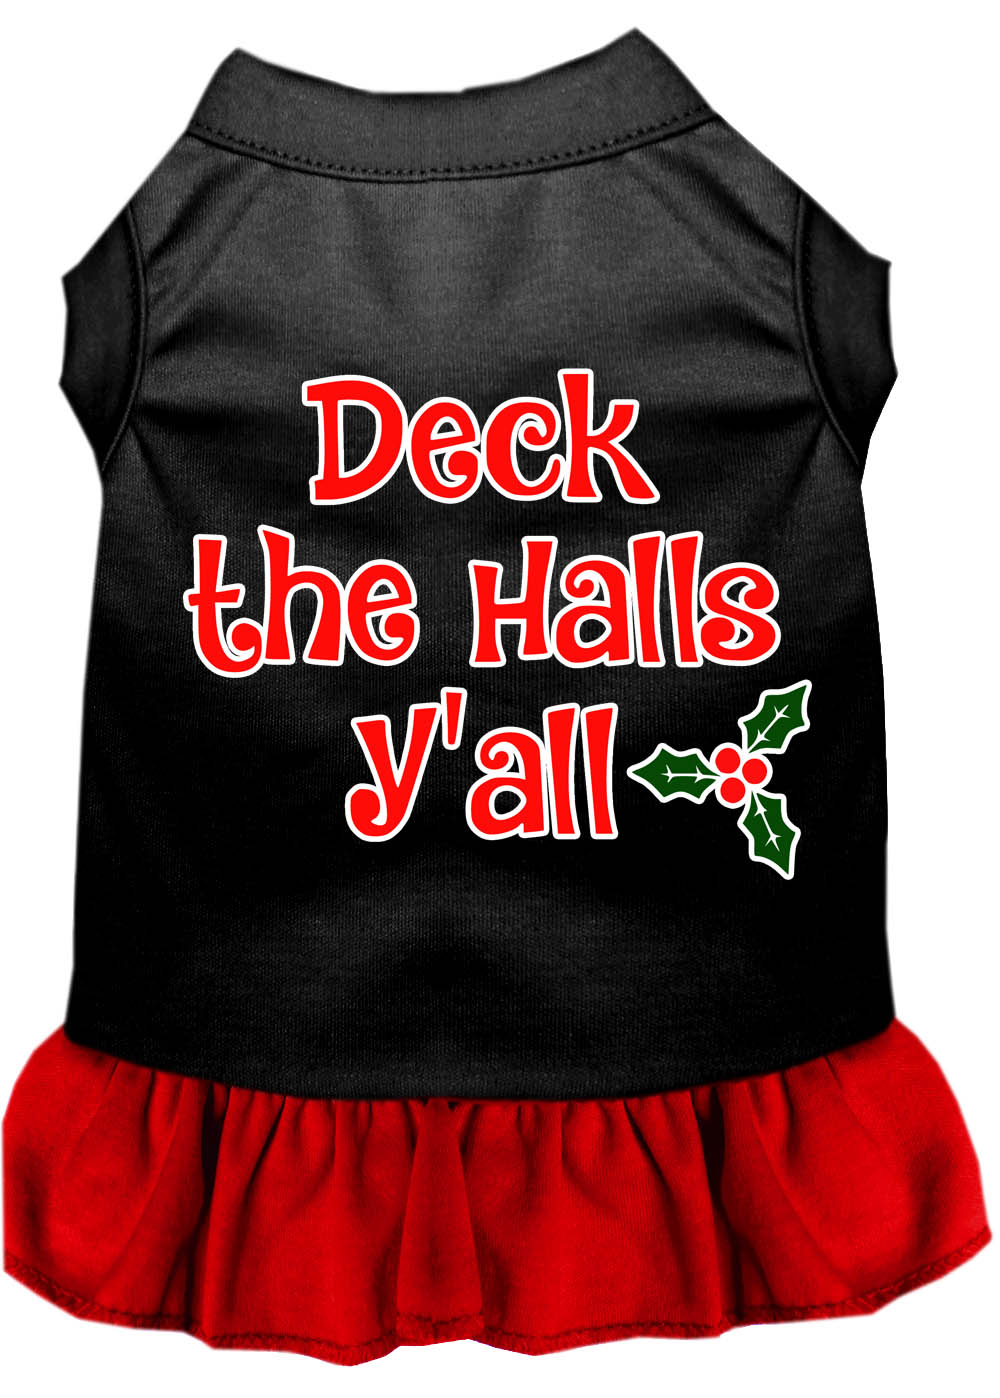 Deck the Halls Y'all Screen Print Dog Dress Black with Red Med